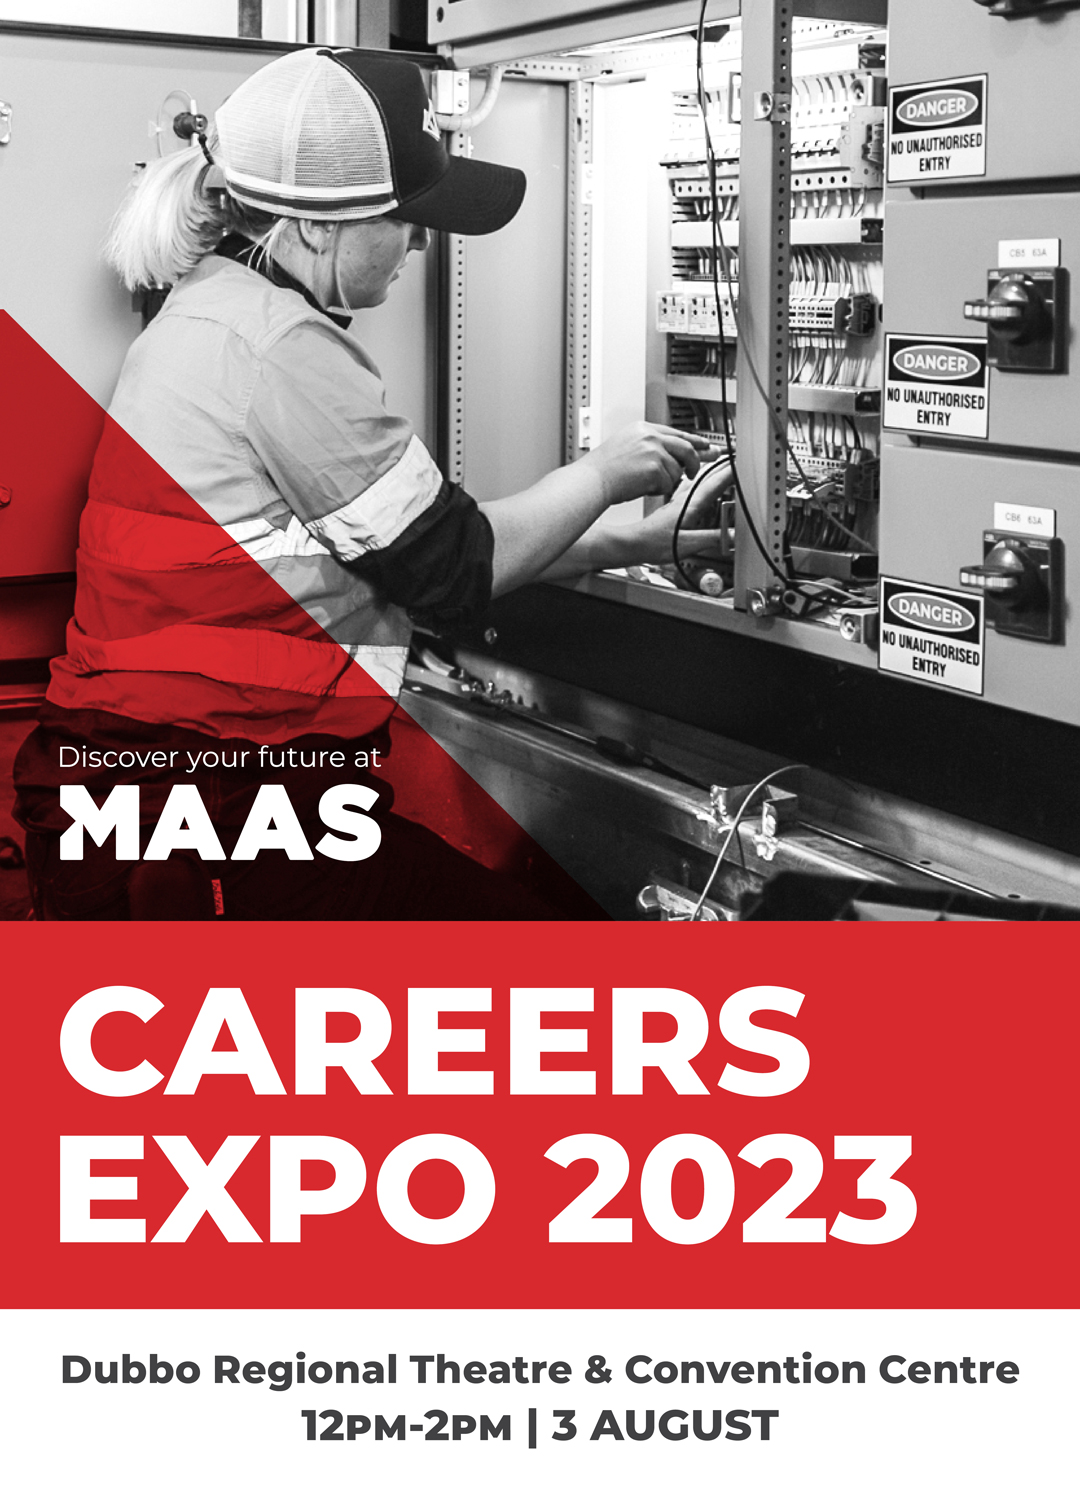 Maas Careers Expo - Dubbo Regional Theatre and Convention Centre - 12pm - 2pm, 3rd August 2023